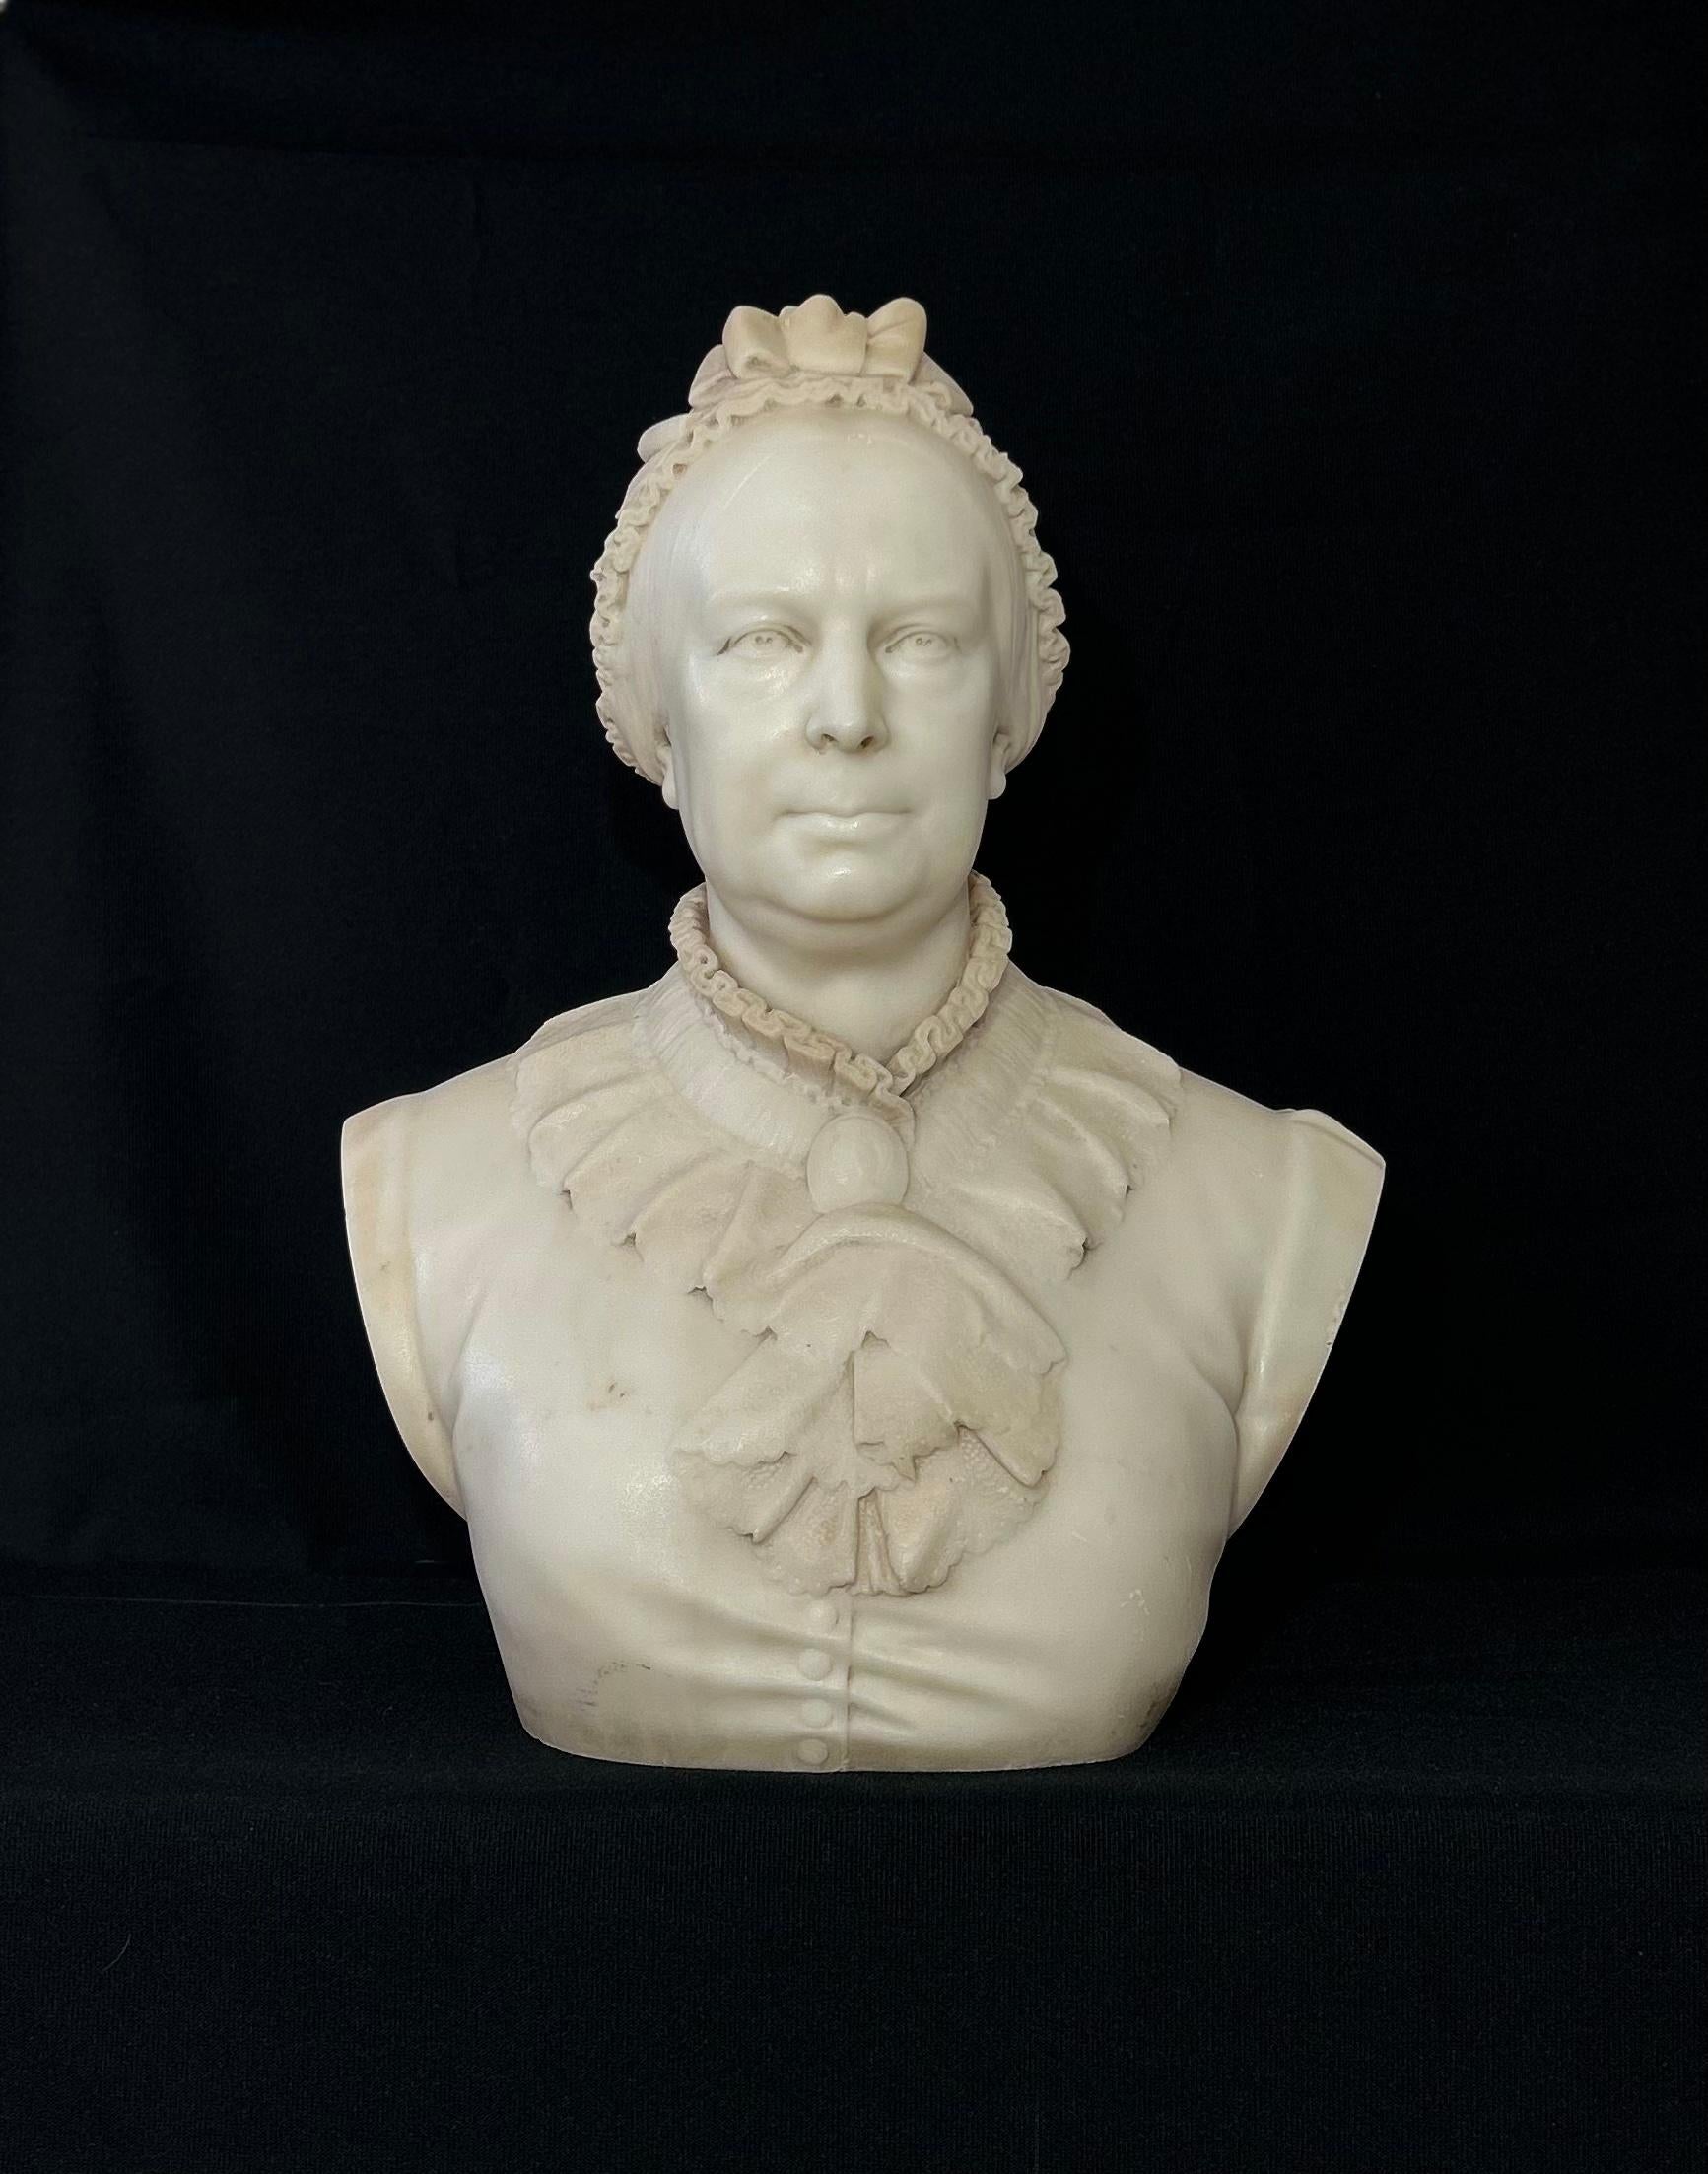 A life size marble bust of Queen Victoria, in excellent condition with no chips or defects. 
Queen Victoria is associated with Britain's great age of Industrial Expansion, economic progress and, especially, Empire. At her death, it was said, Britain